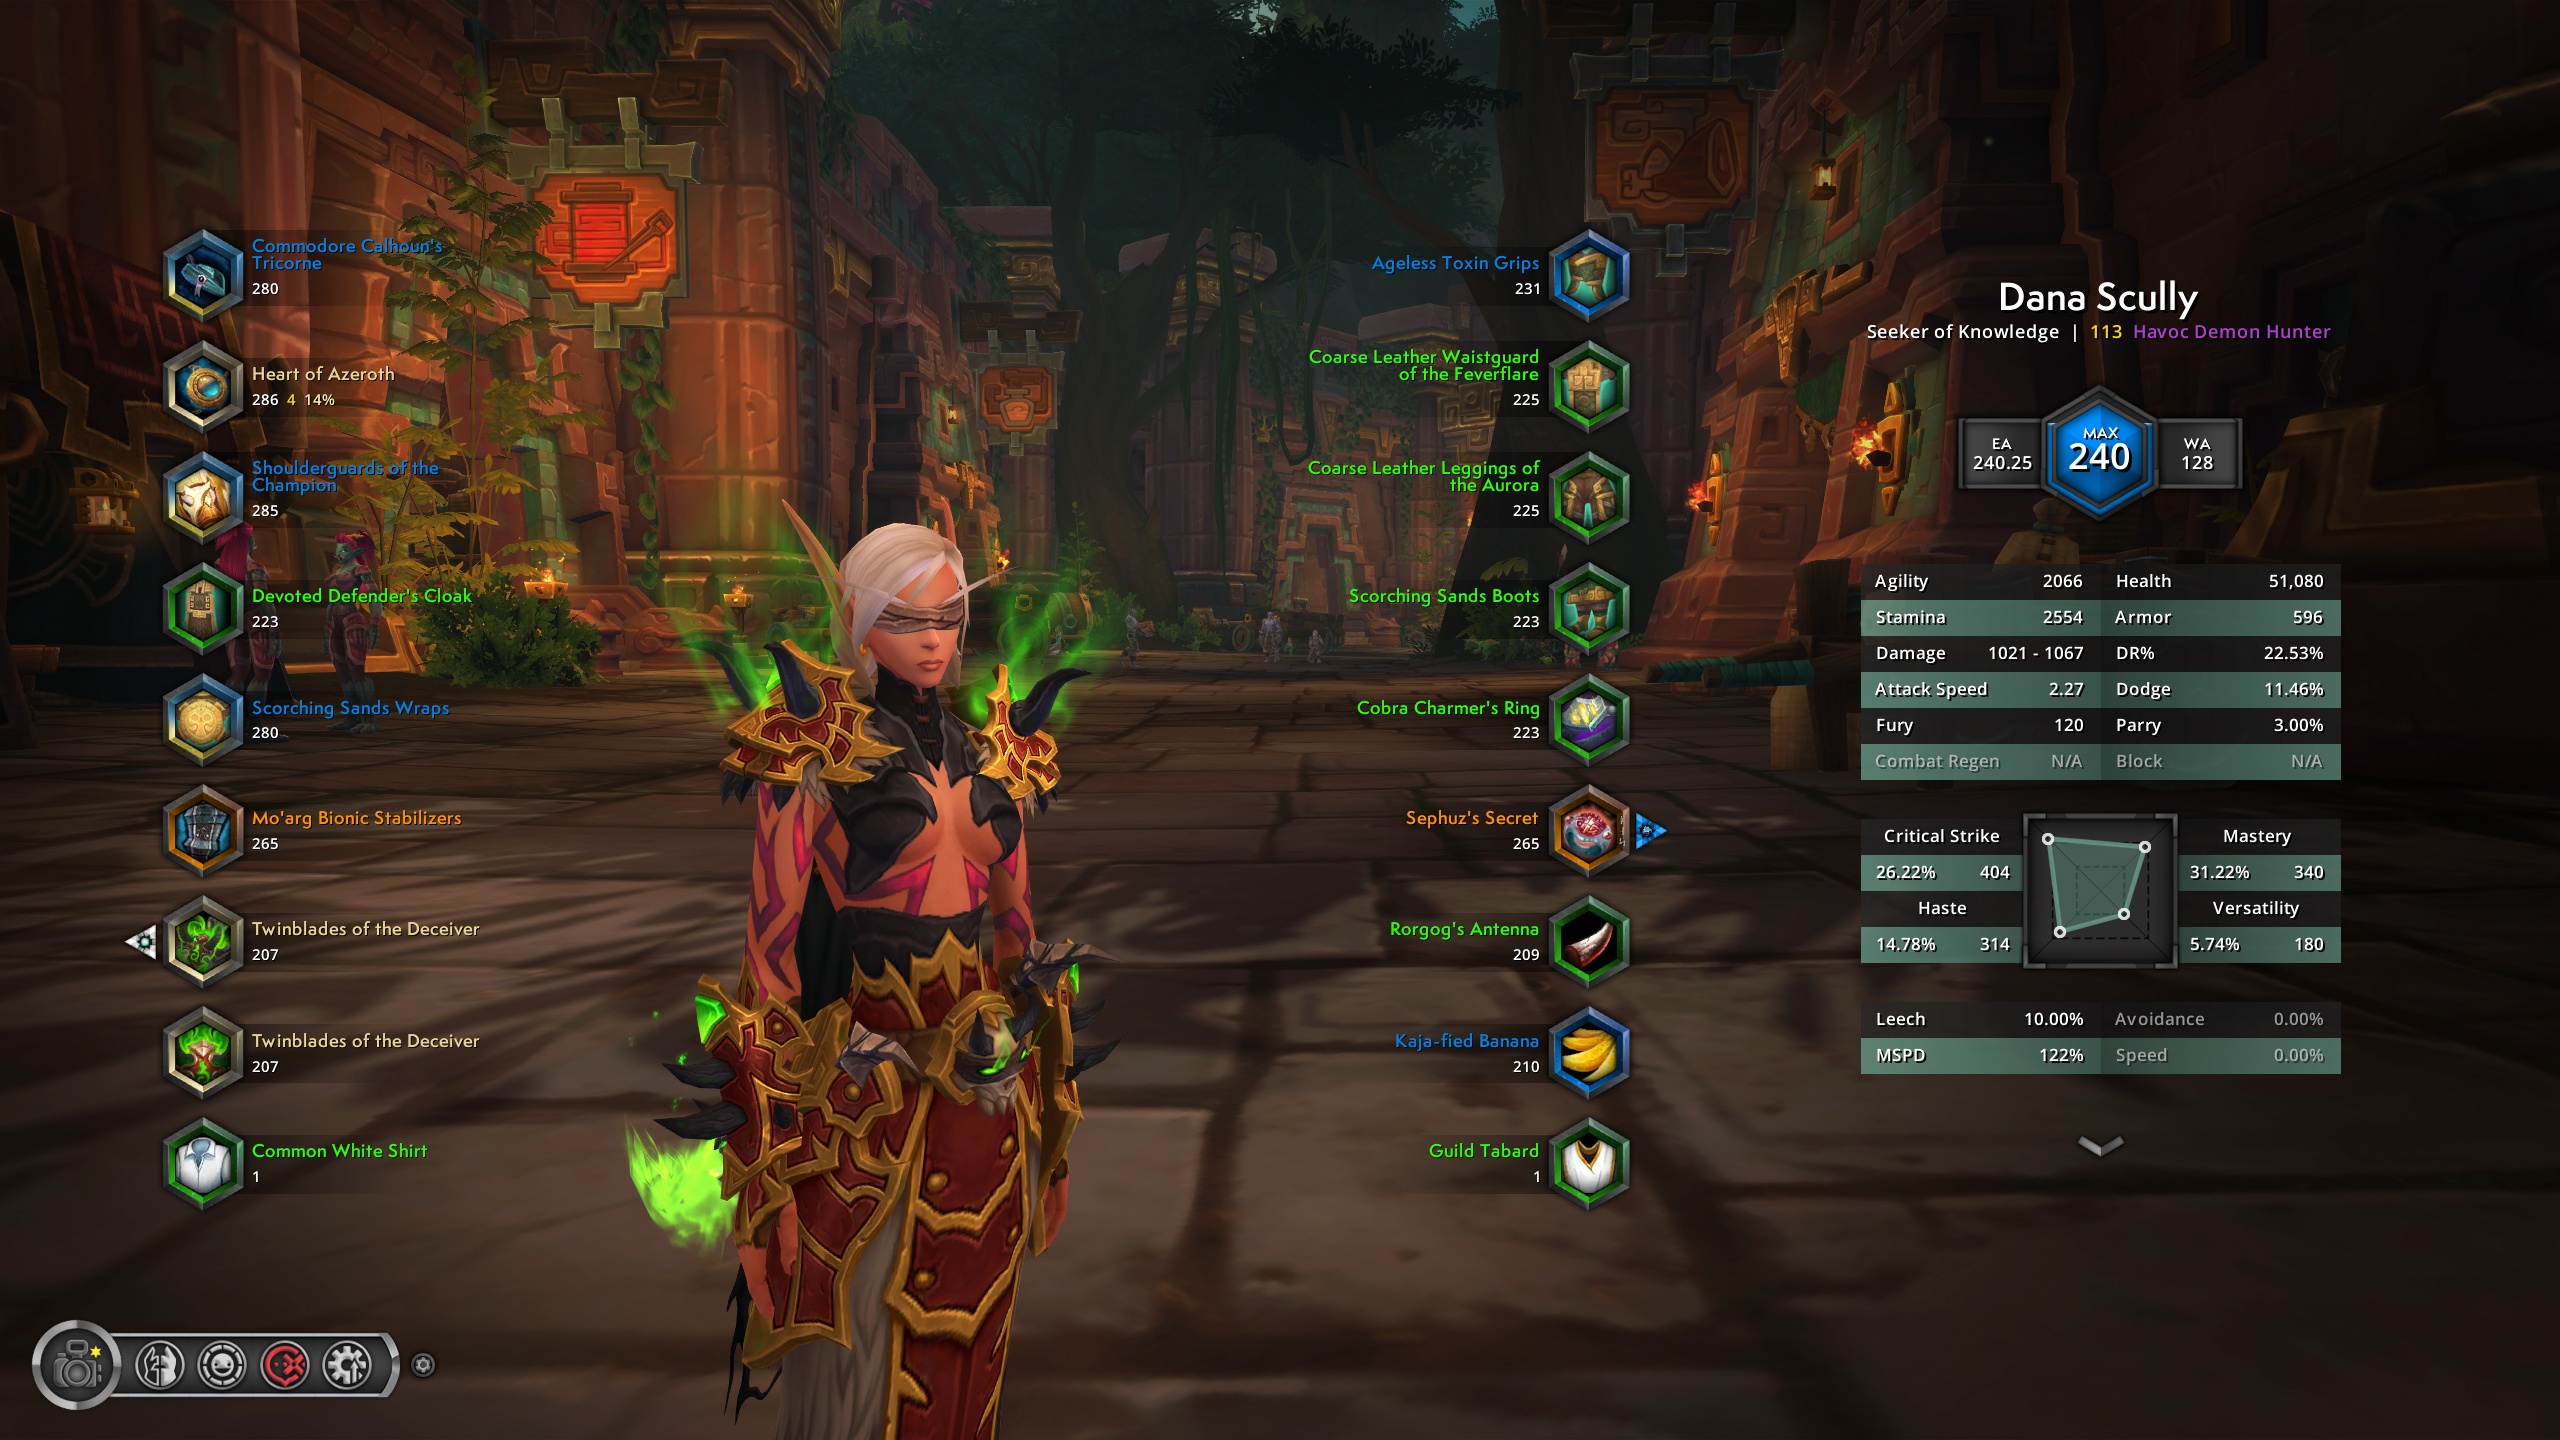 wow addons not showing up on character screen